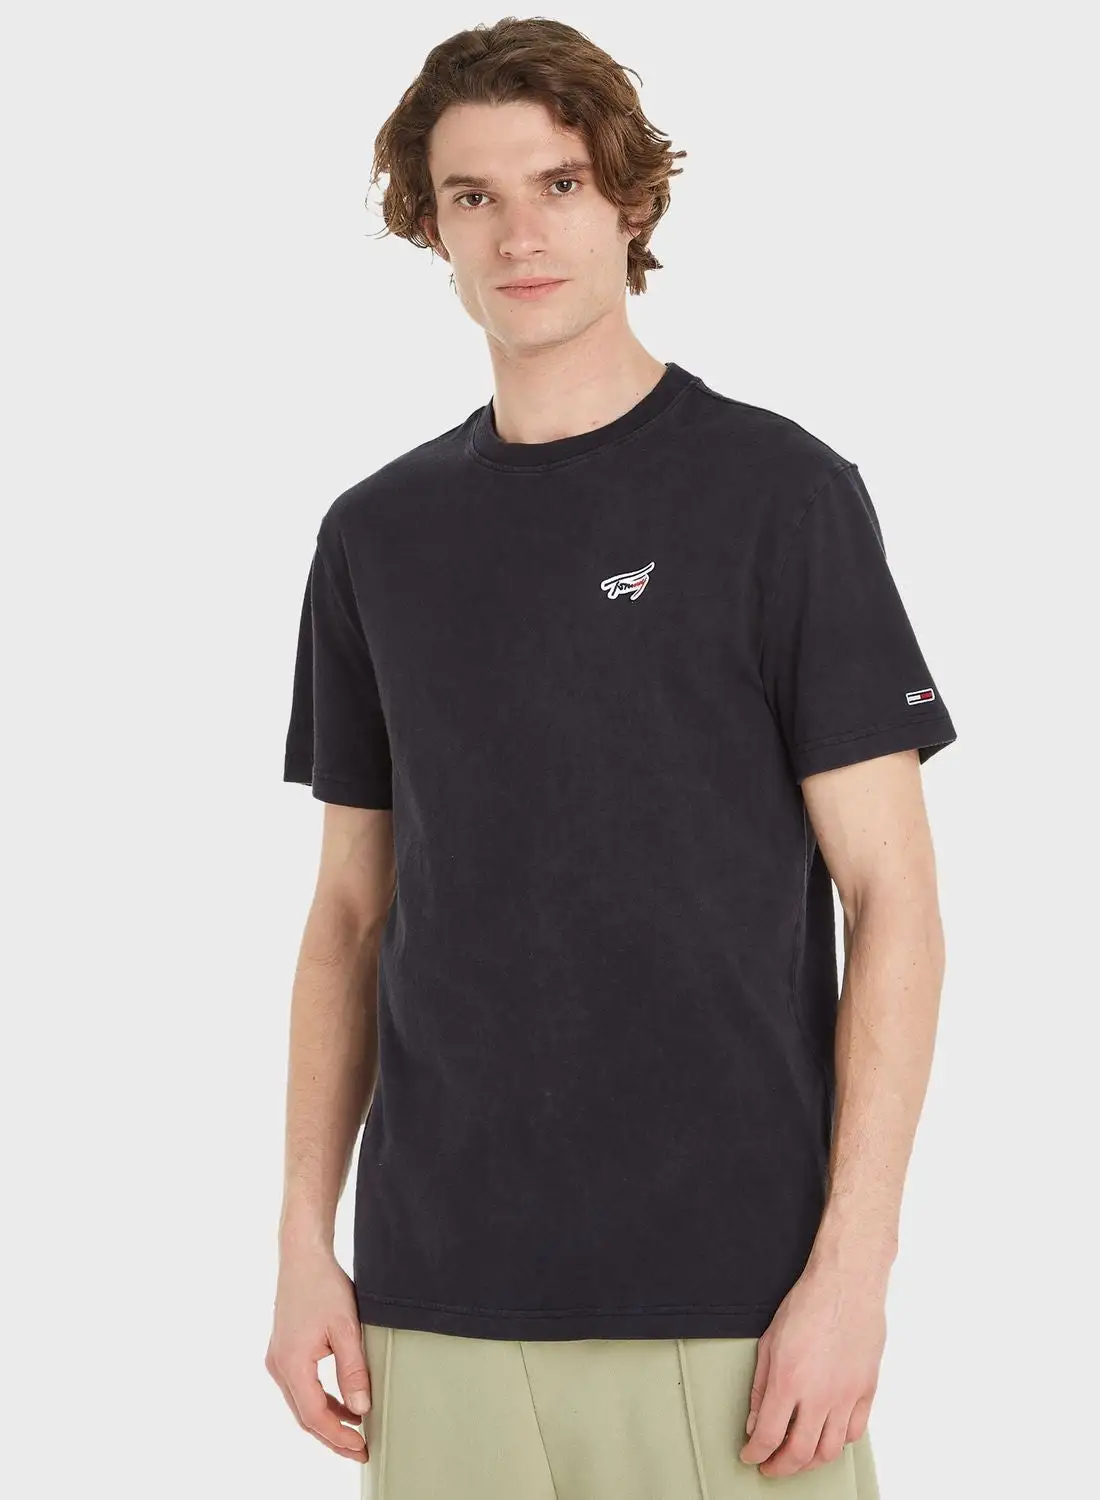 TOMMY JEANS Logo Crew Neck T-Shirt